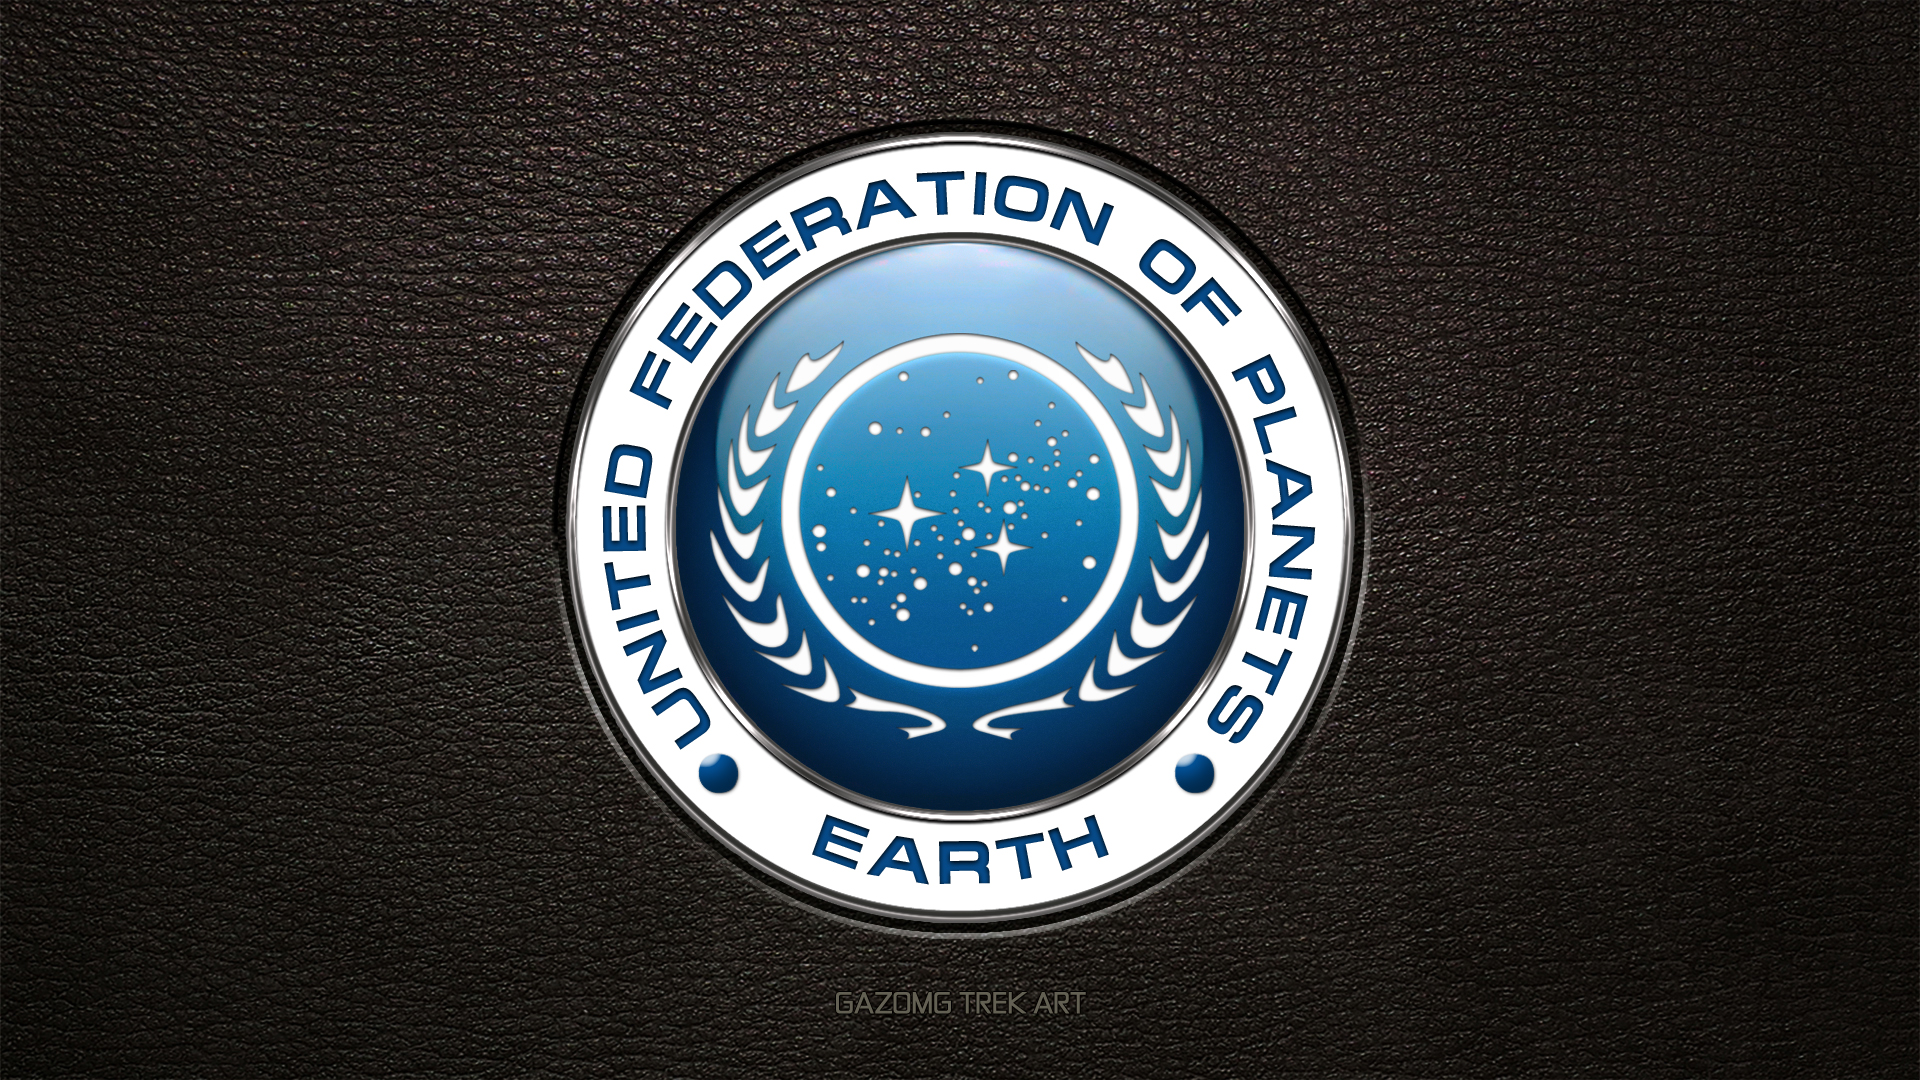 United Federation Of Planets Wallpapers